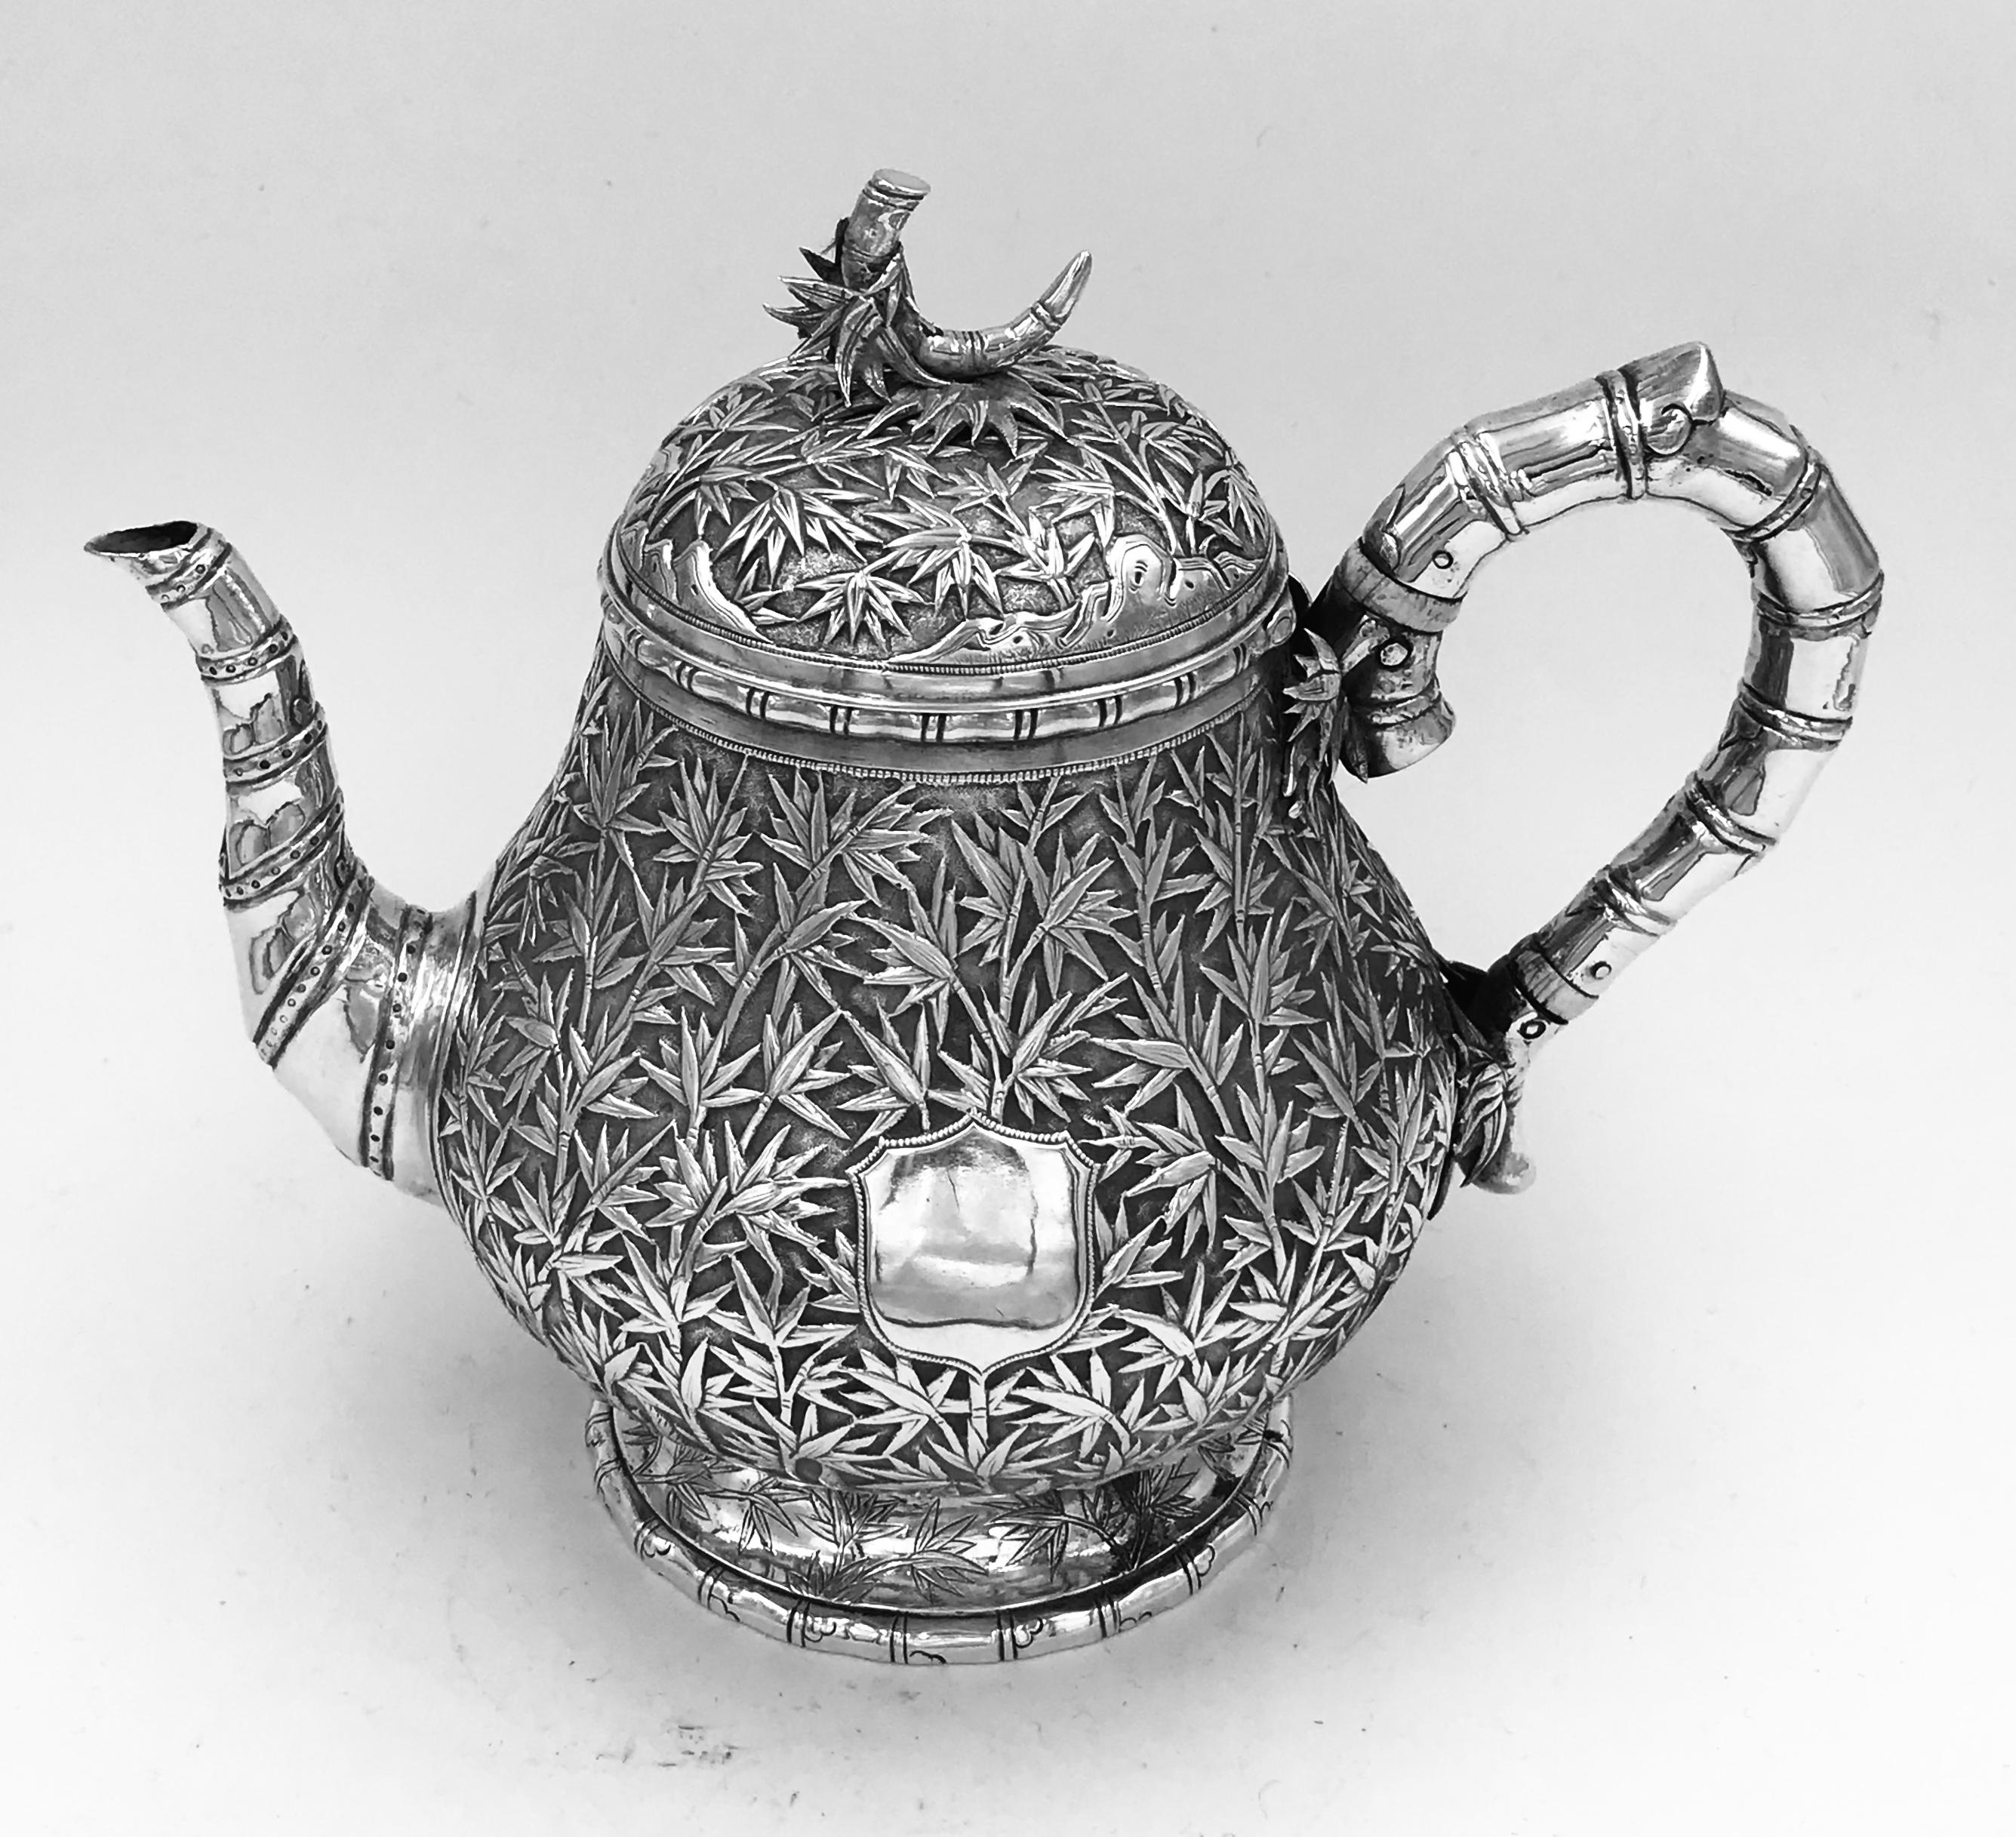 A Chinese Export Silver Teapot, circa 1865, profusely decorated with bamboo and with a vacant shield-shaped cartouche. There is a retailer mark of a Lombardic 